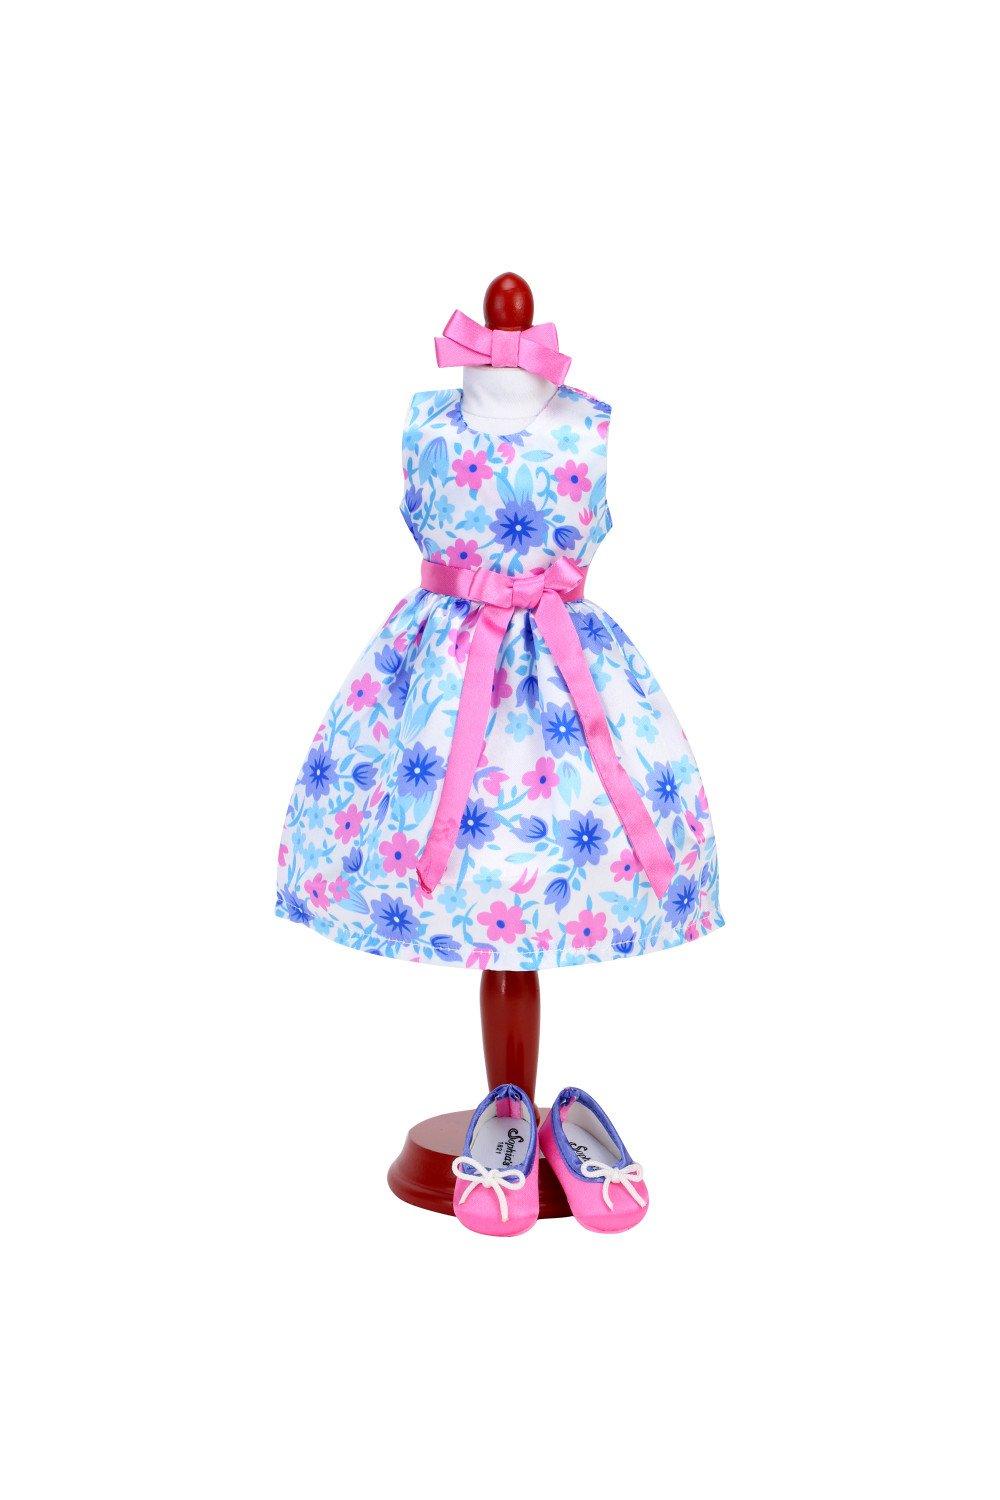 Sophia’s Floral Satin 15" Baby Doll Dress Outfit, Bow & Doll Shoes Set